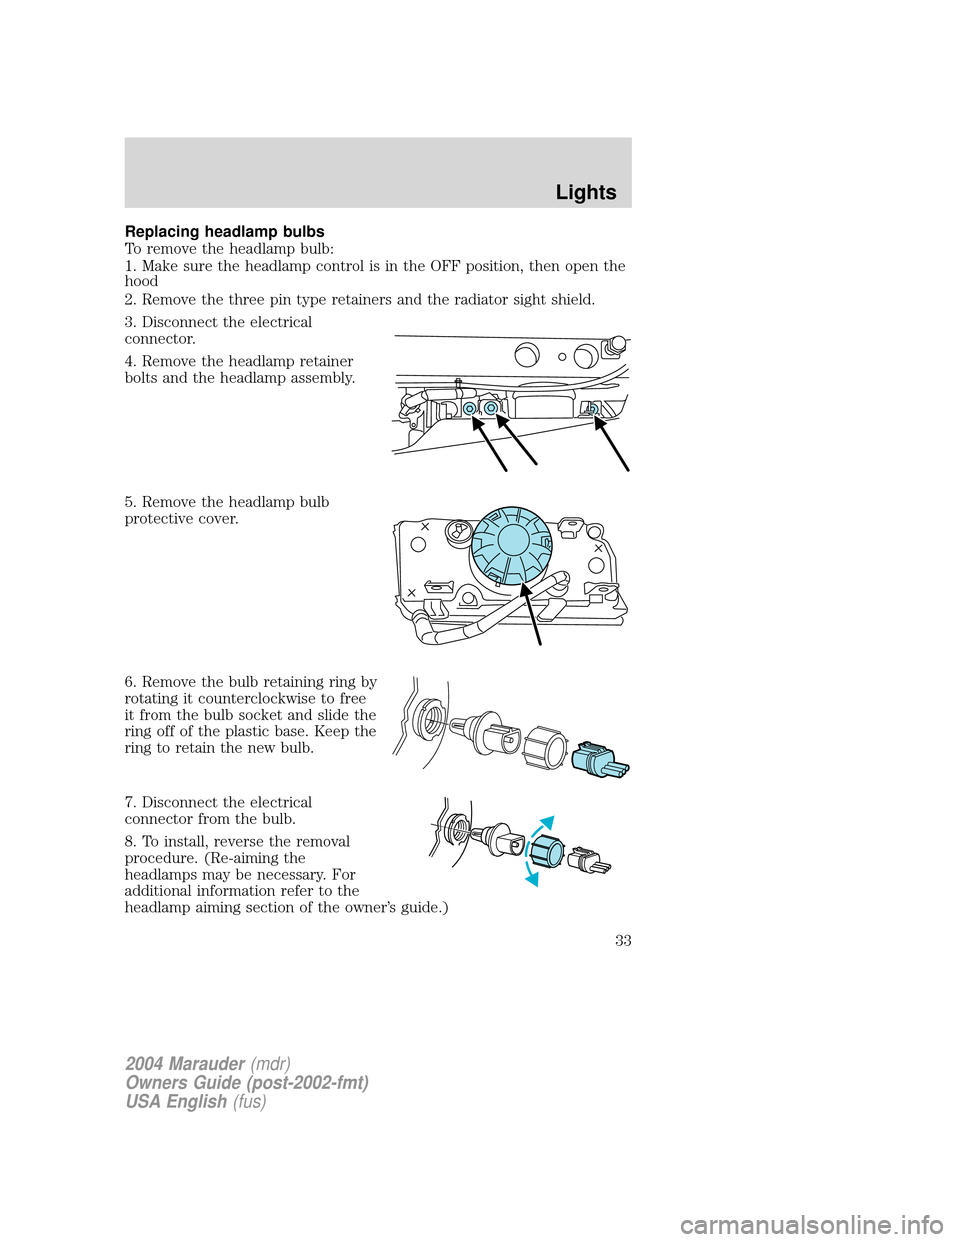 Mercury Marauder 2004  s Owners Guide Replacing headlamp bulbs
To remove the headlamp bulb:
1. Make sure the headlamp control is in the OFF position, then open the
hood
2. Remove the three pin type retainers and the radiator sight shield.